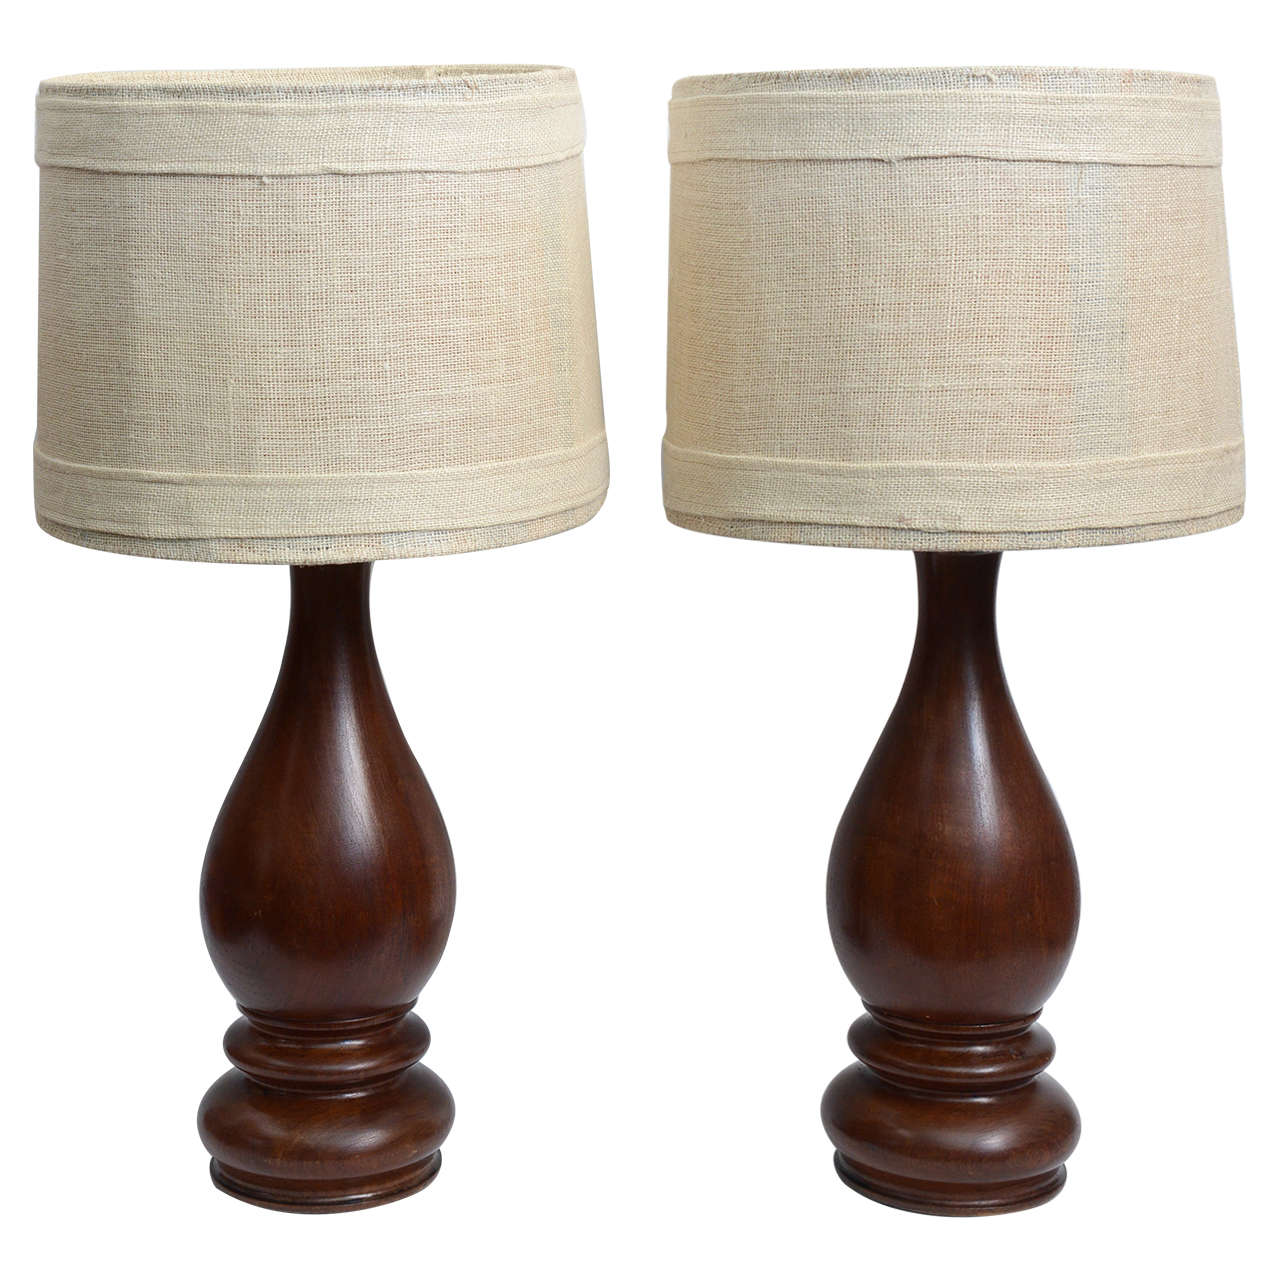 Dark Hand Turned Wood Table Lamps, Hand Turned Wooden Table Lamps